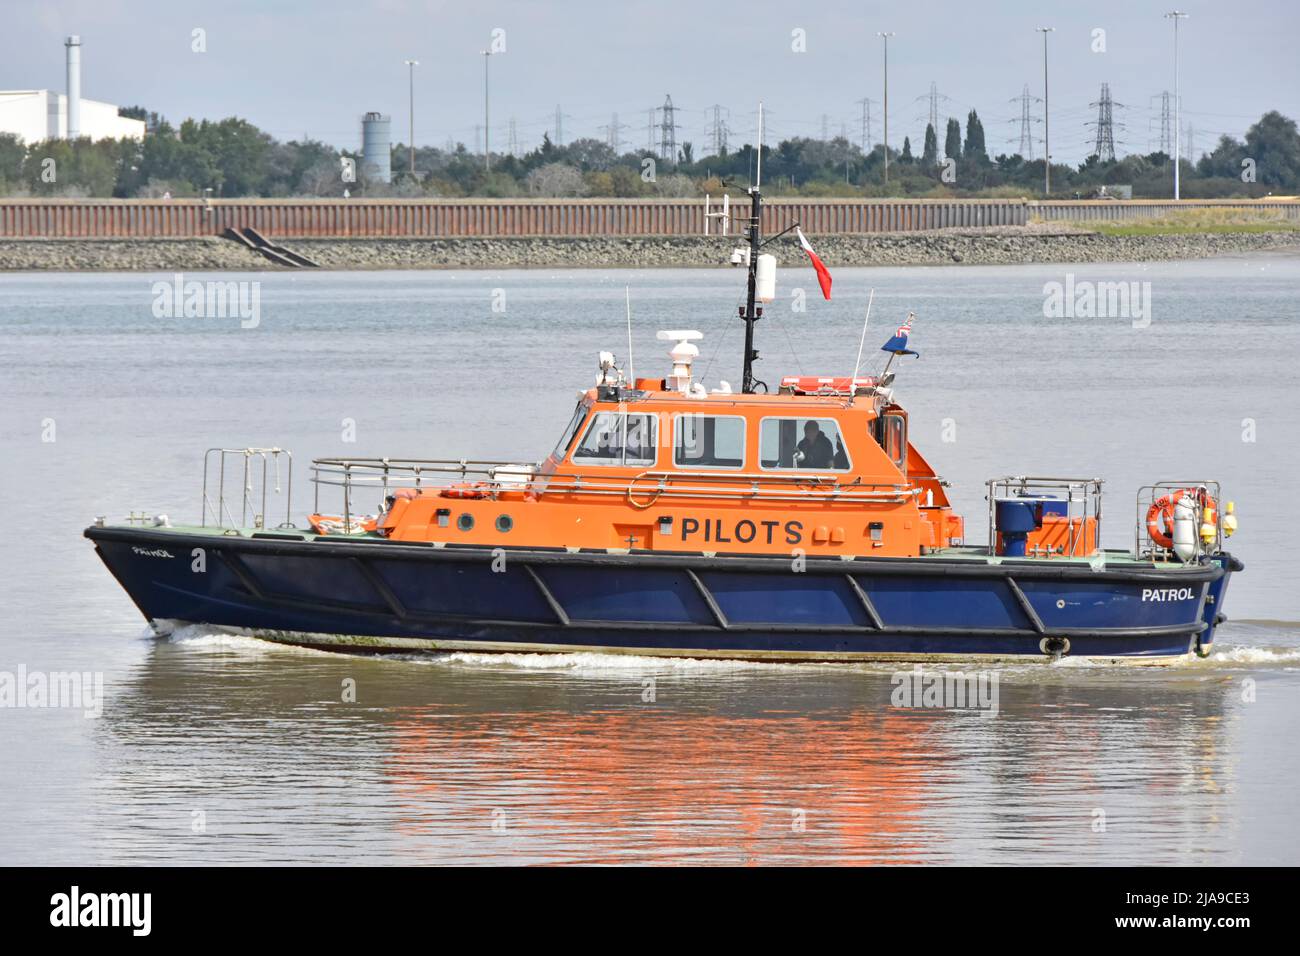 Vista laterale o del porto Port of London Authority 'Patrol' Cutter a Pilots Launch Based & See here on River Thames Off Gravesend Kent UK Essex Shore Beyond Foto Stock